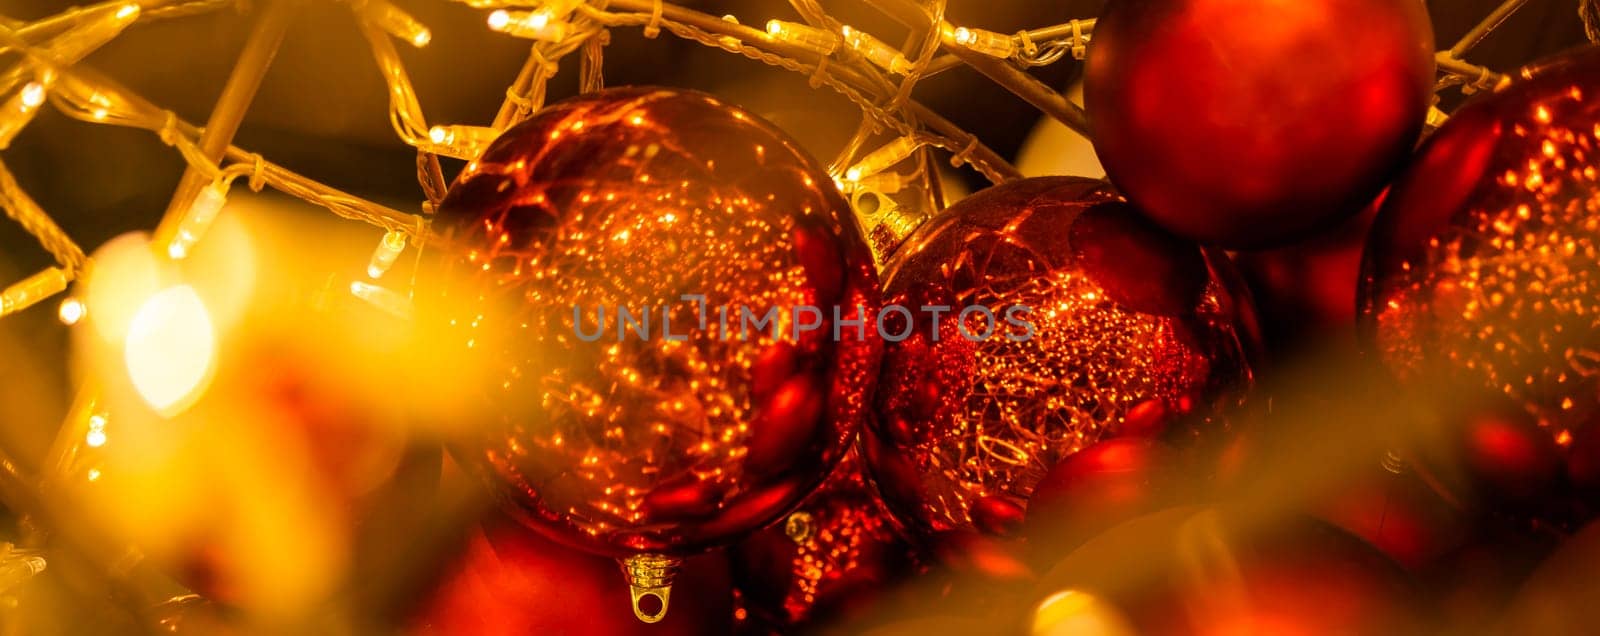 Red glowing Christmas balls garlands close-up. Holidays decoration and festive xmas concept. Copy space and empty place for text, mock up greeting card.